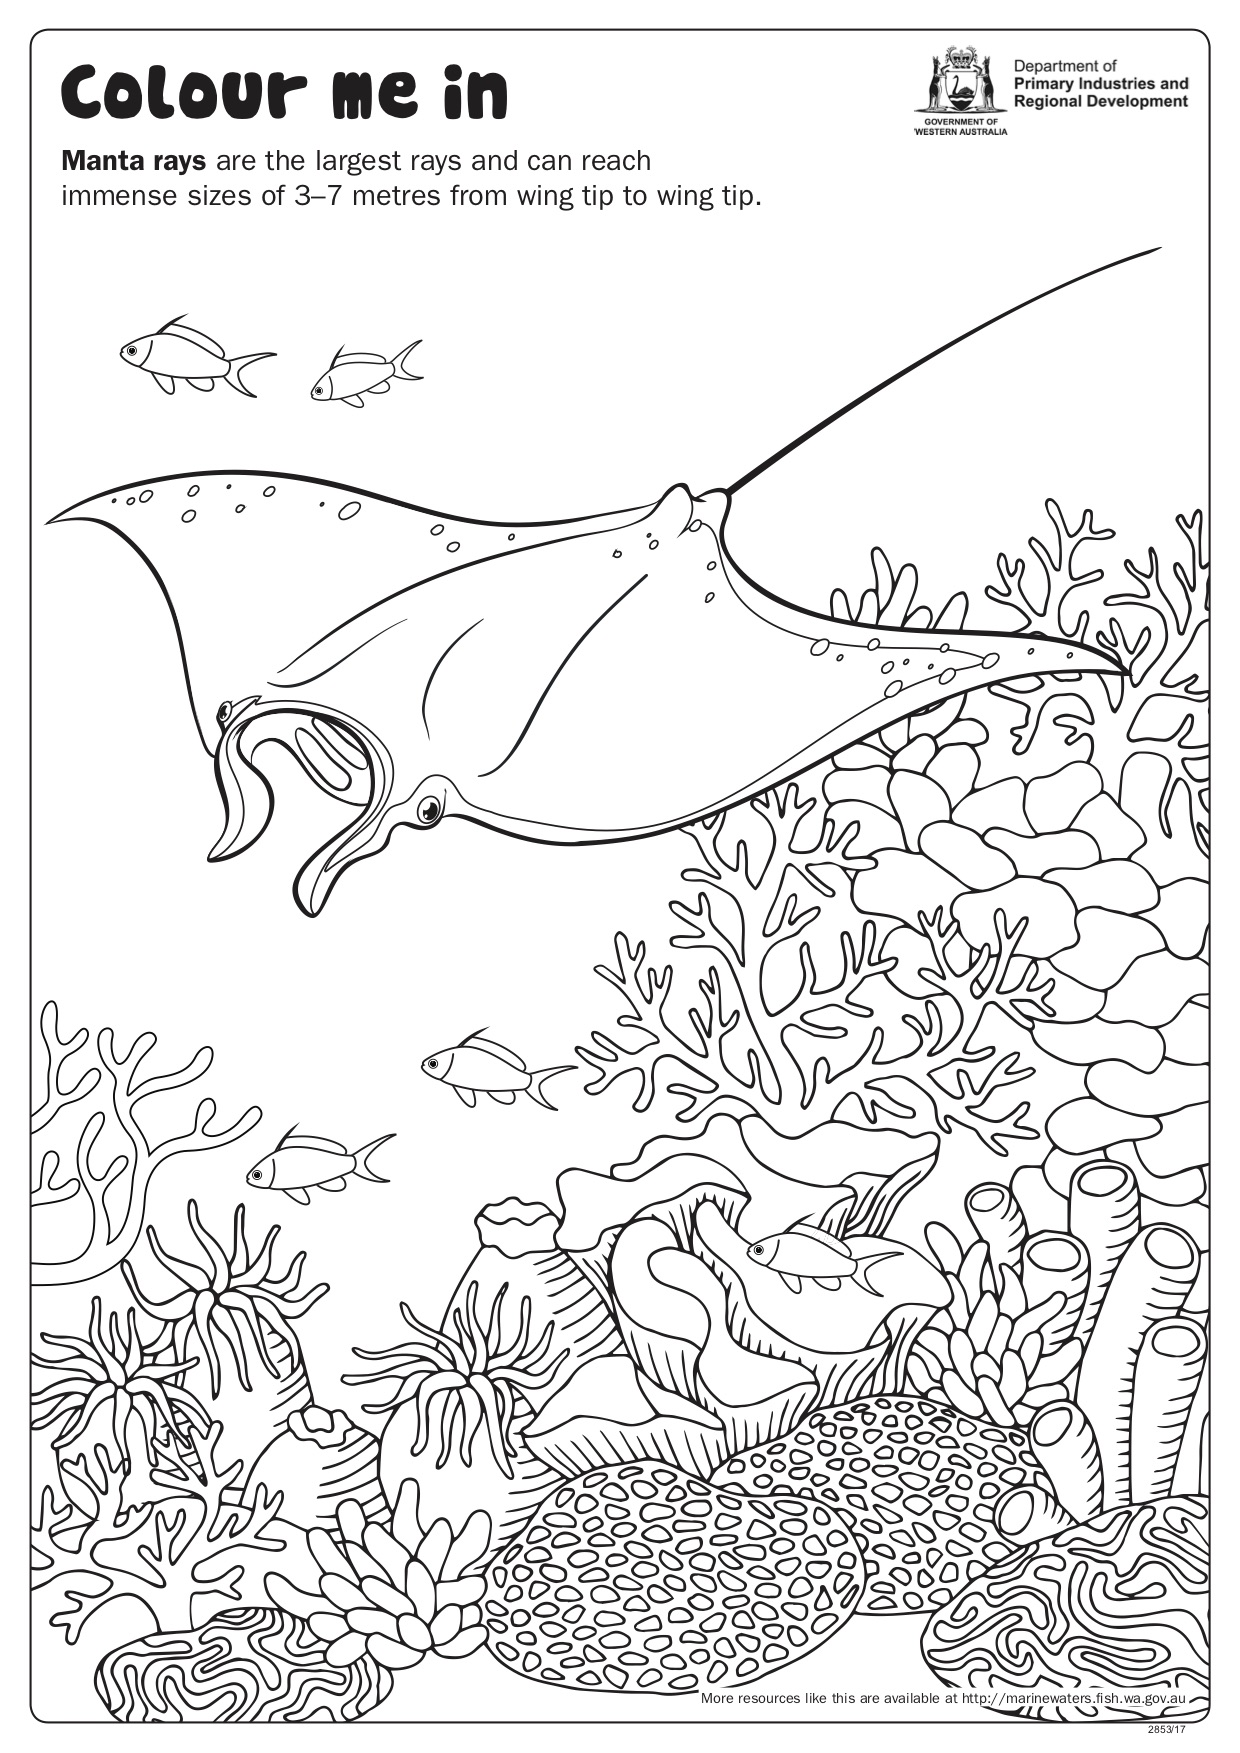 Fishy Fun Sheet: Manta Ray - Colour In • Department of Primary Industries  and Regional Development